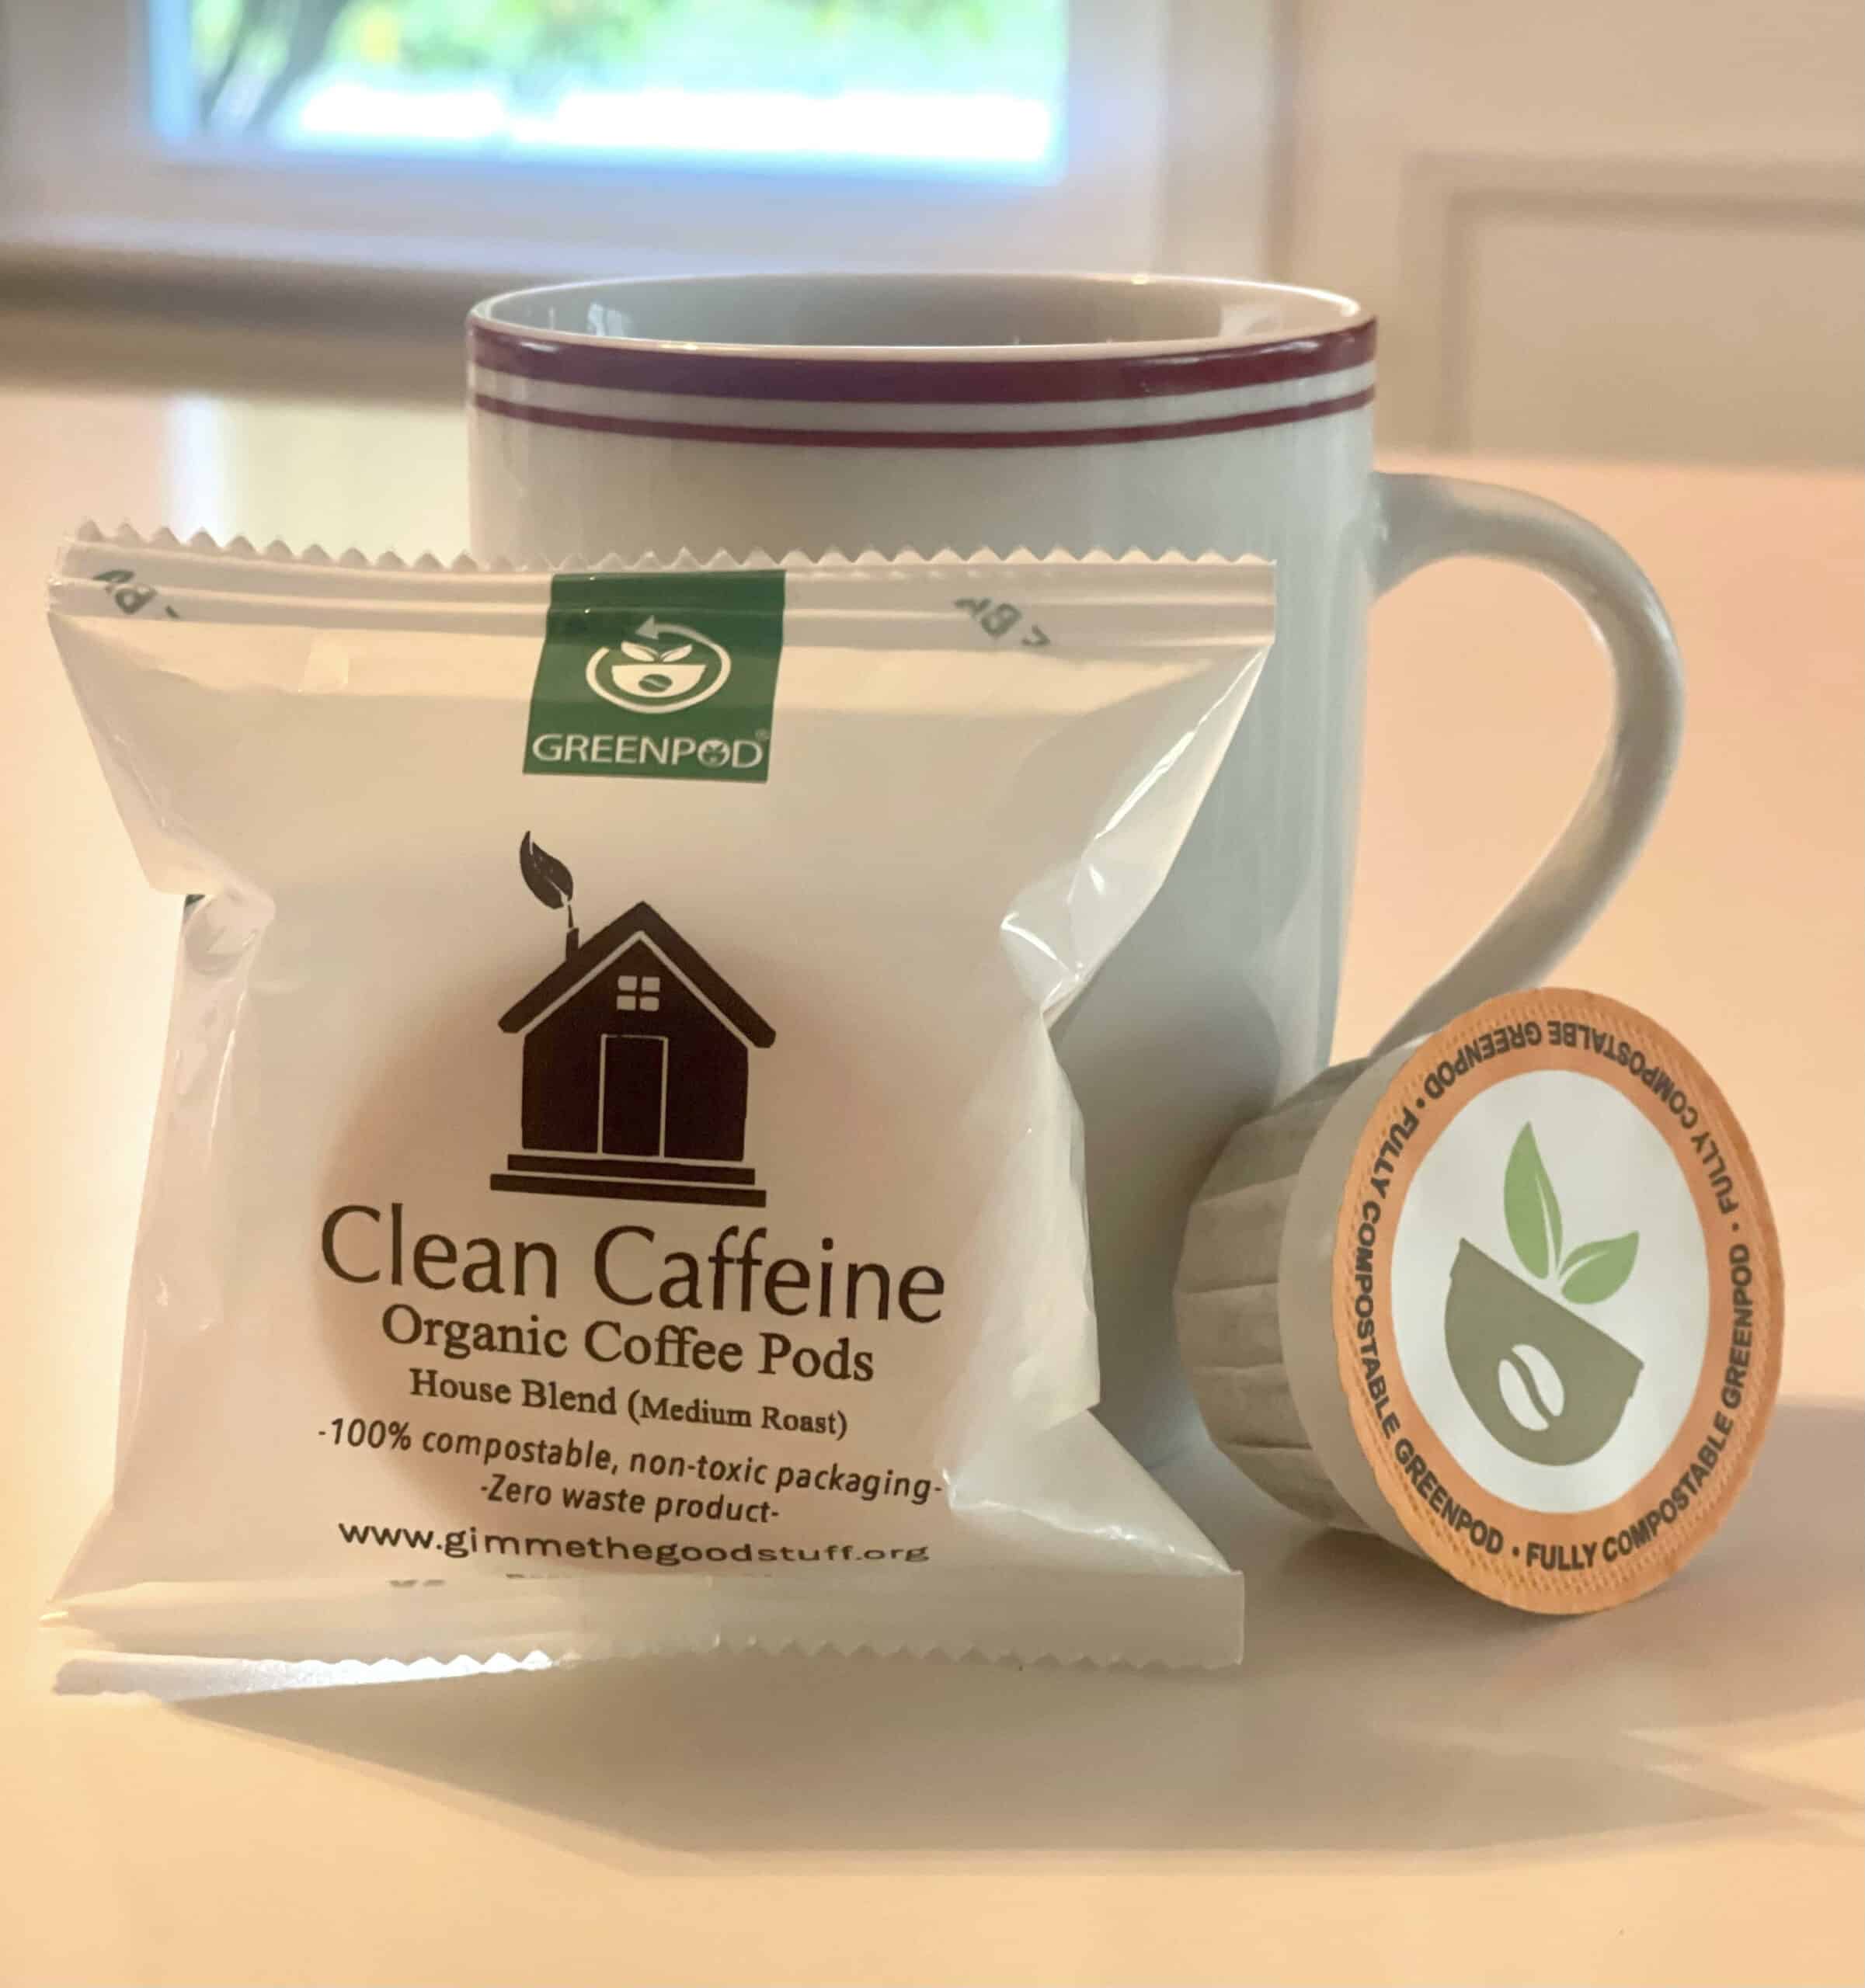 An image of a coffee cup behind a compostable K cup with organic coffee.